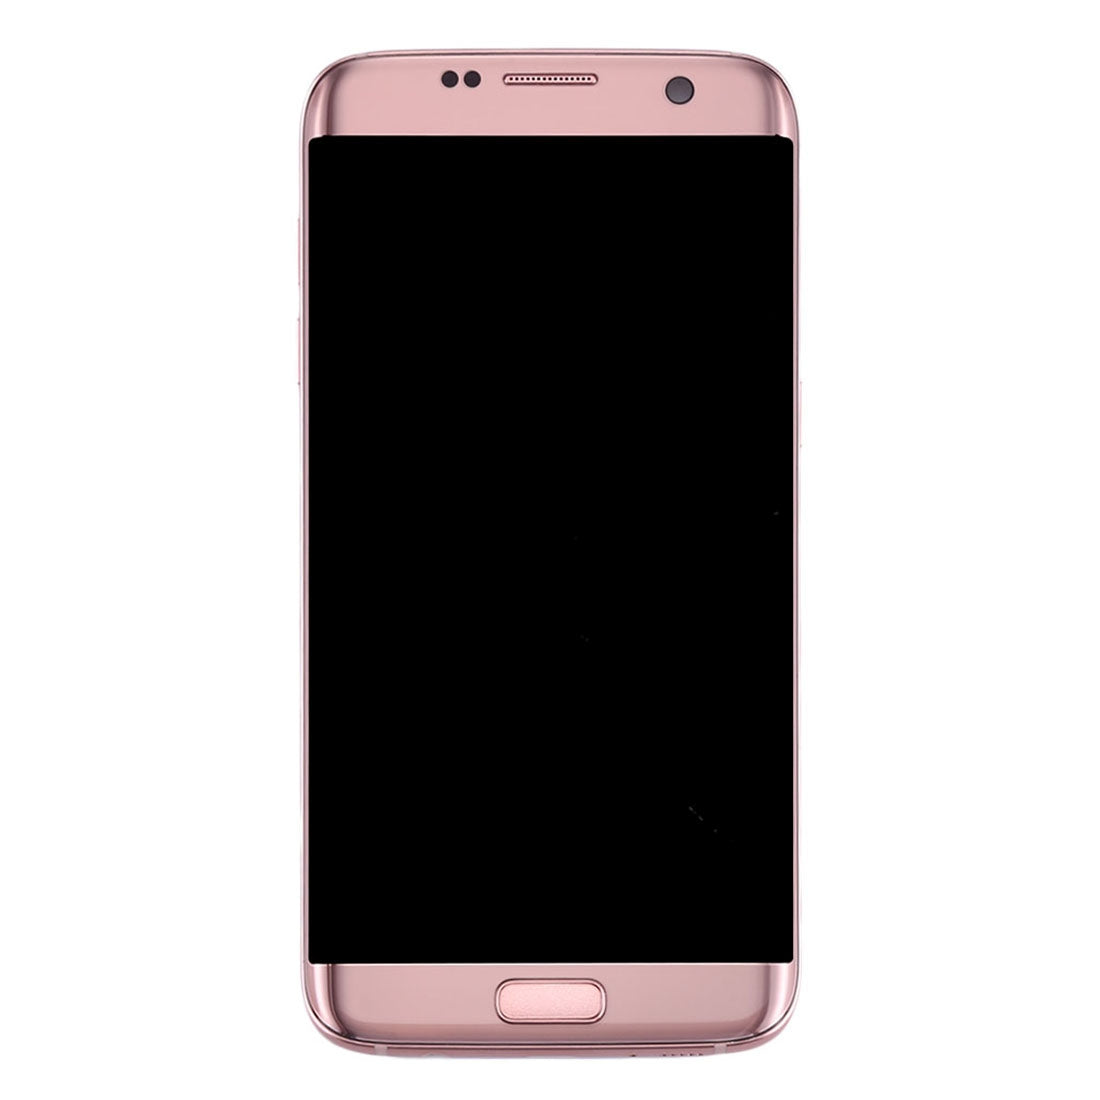 Full Screen + Touch + Frame Samsung Galaxy S7 Edge / G935F Pink